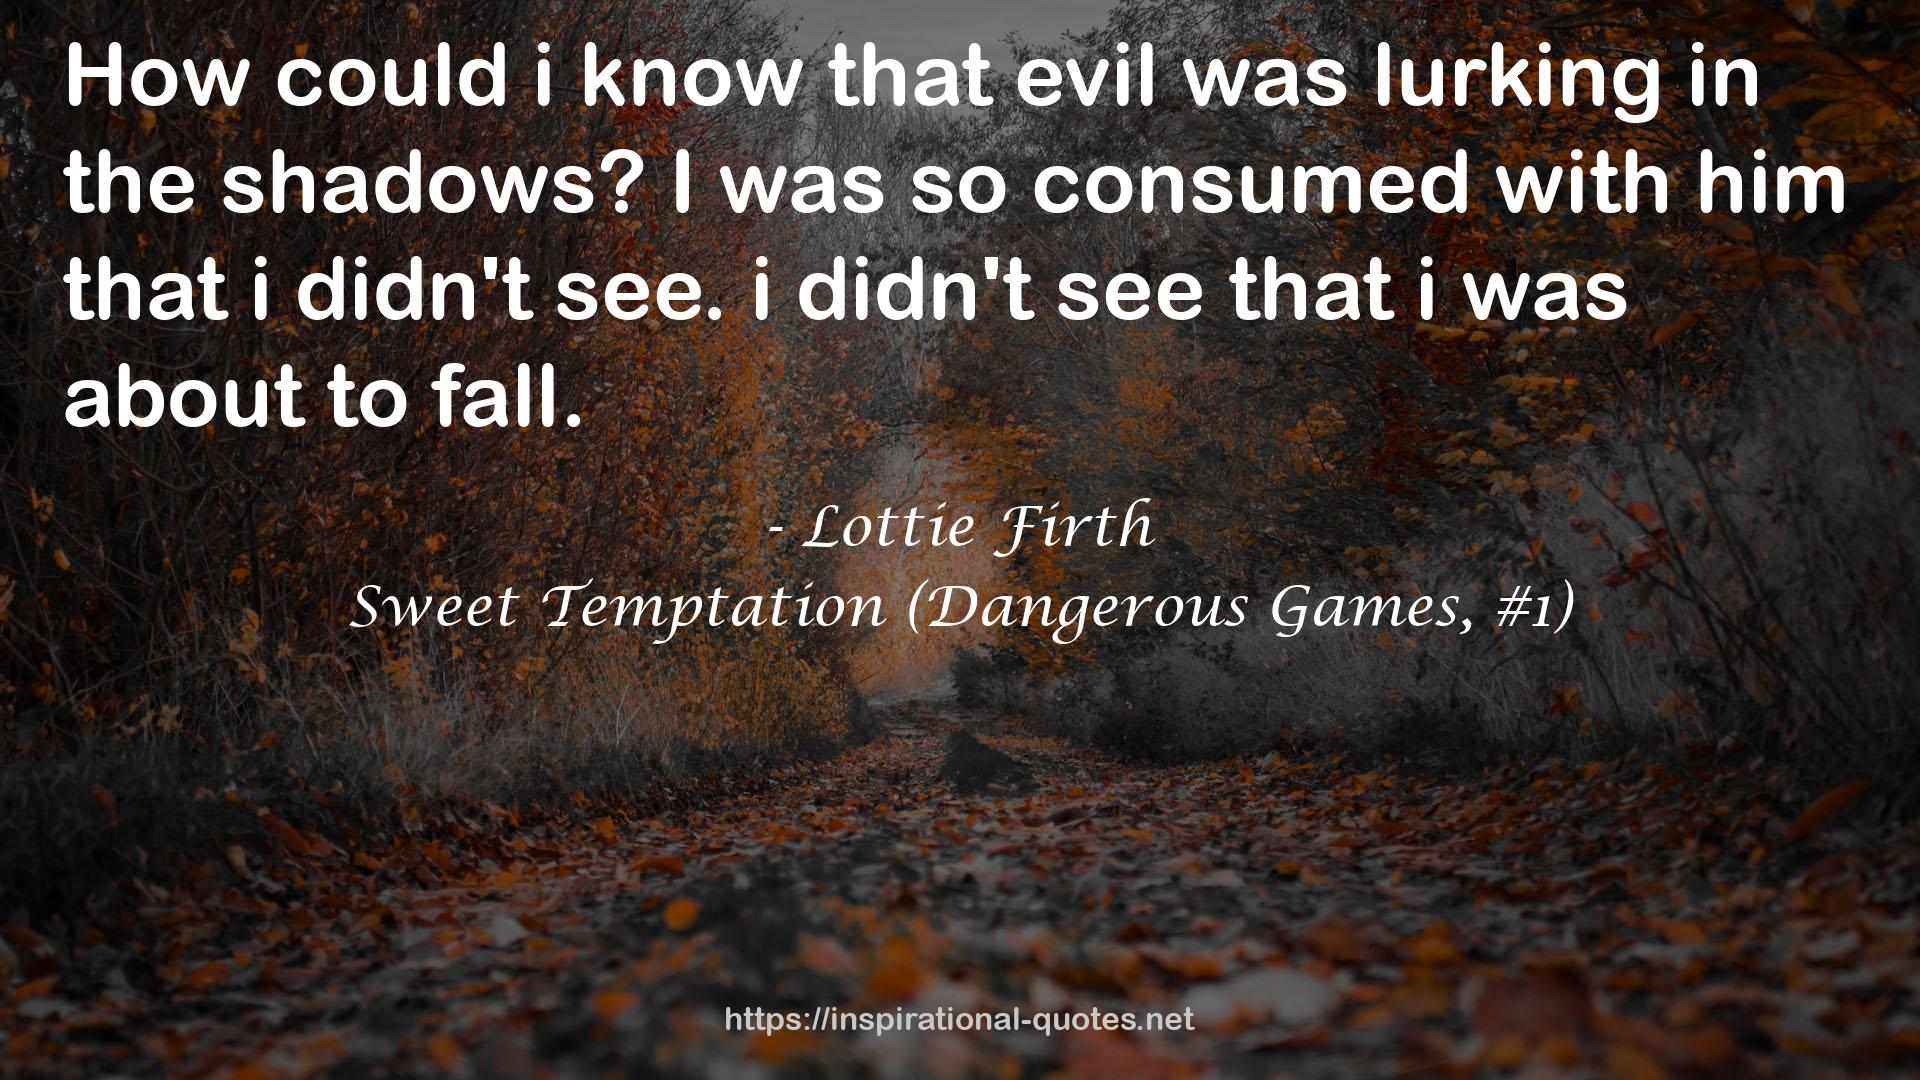 Lottie Firth QUOTES